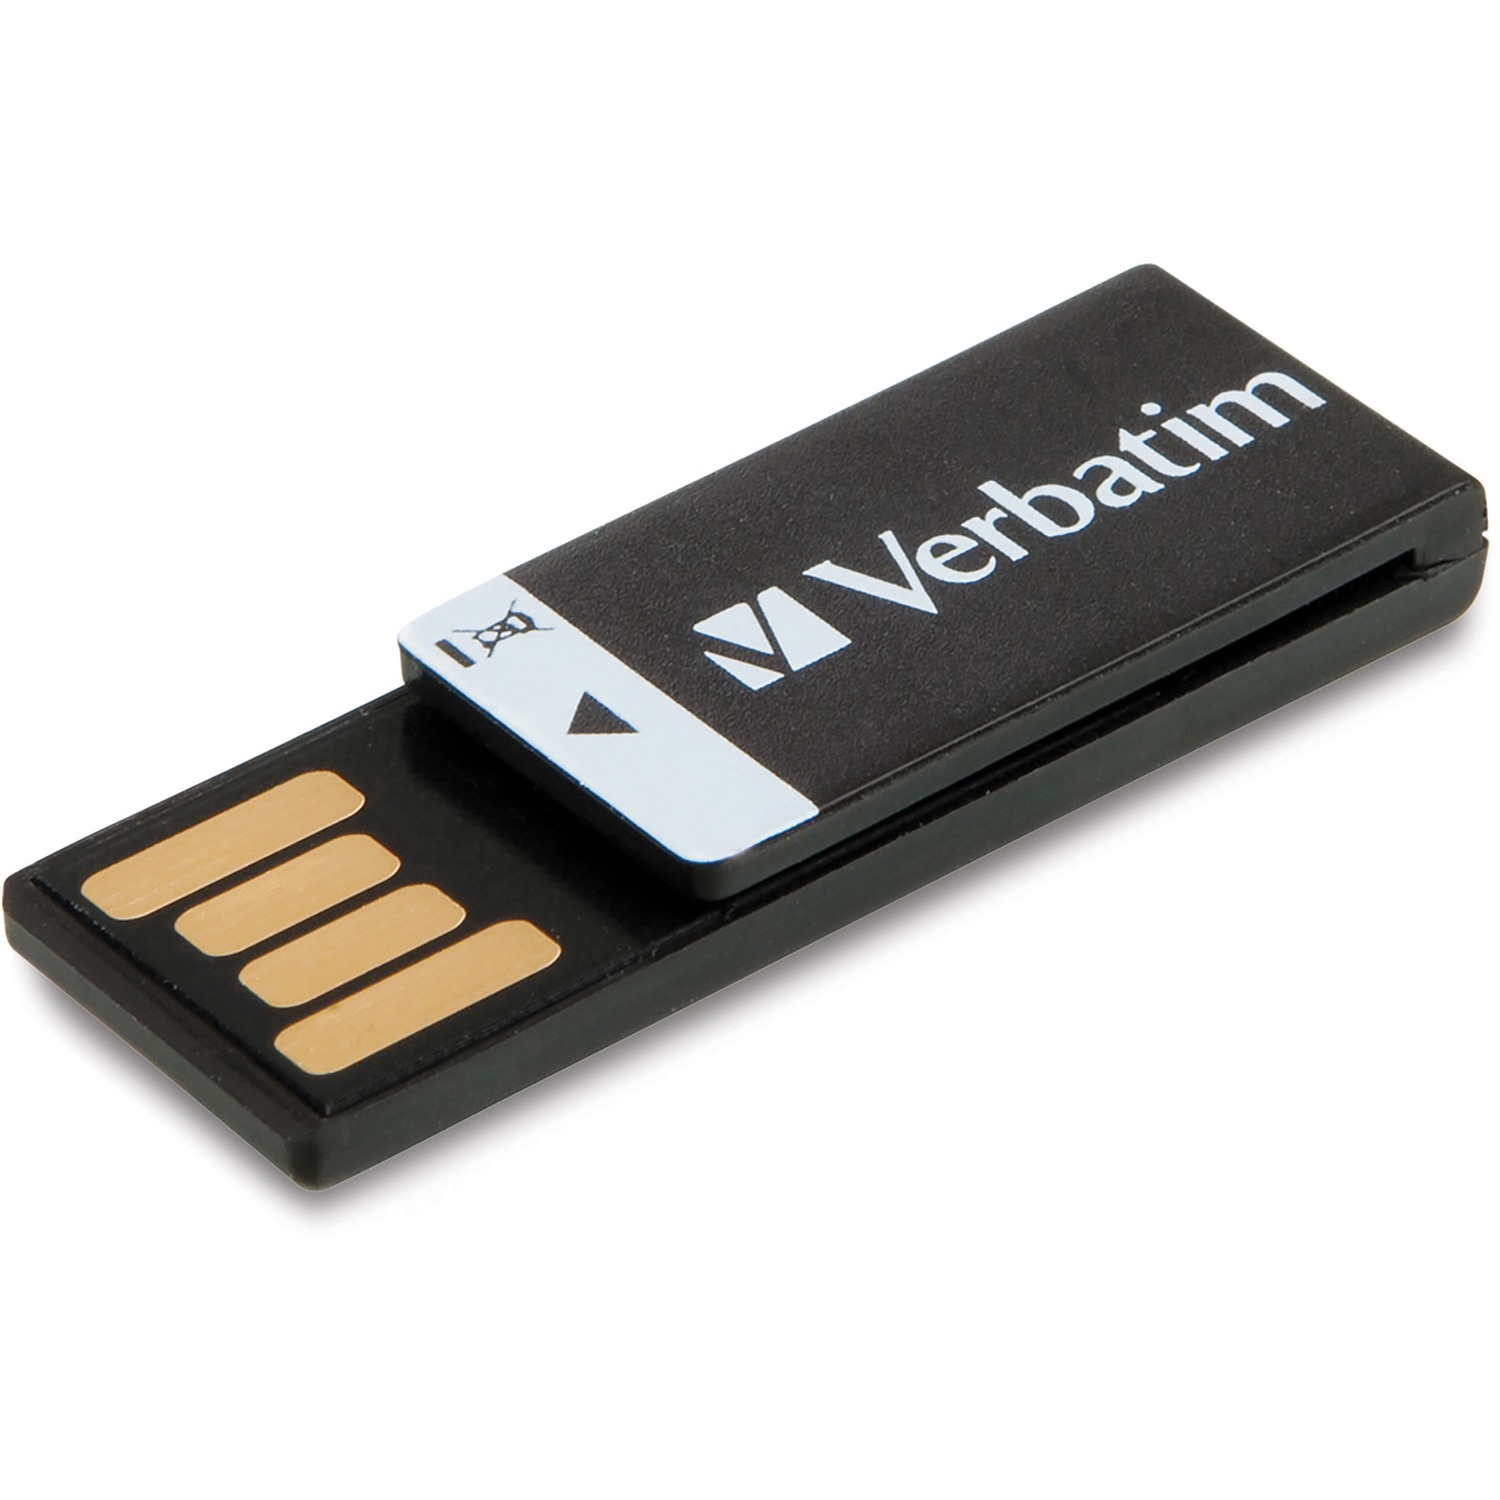 password protect flash drive mac and pc